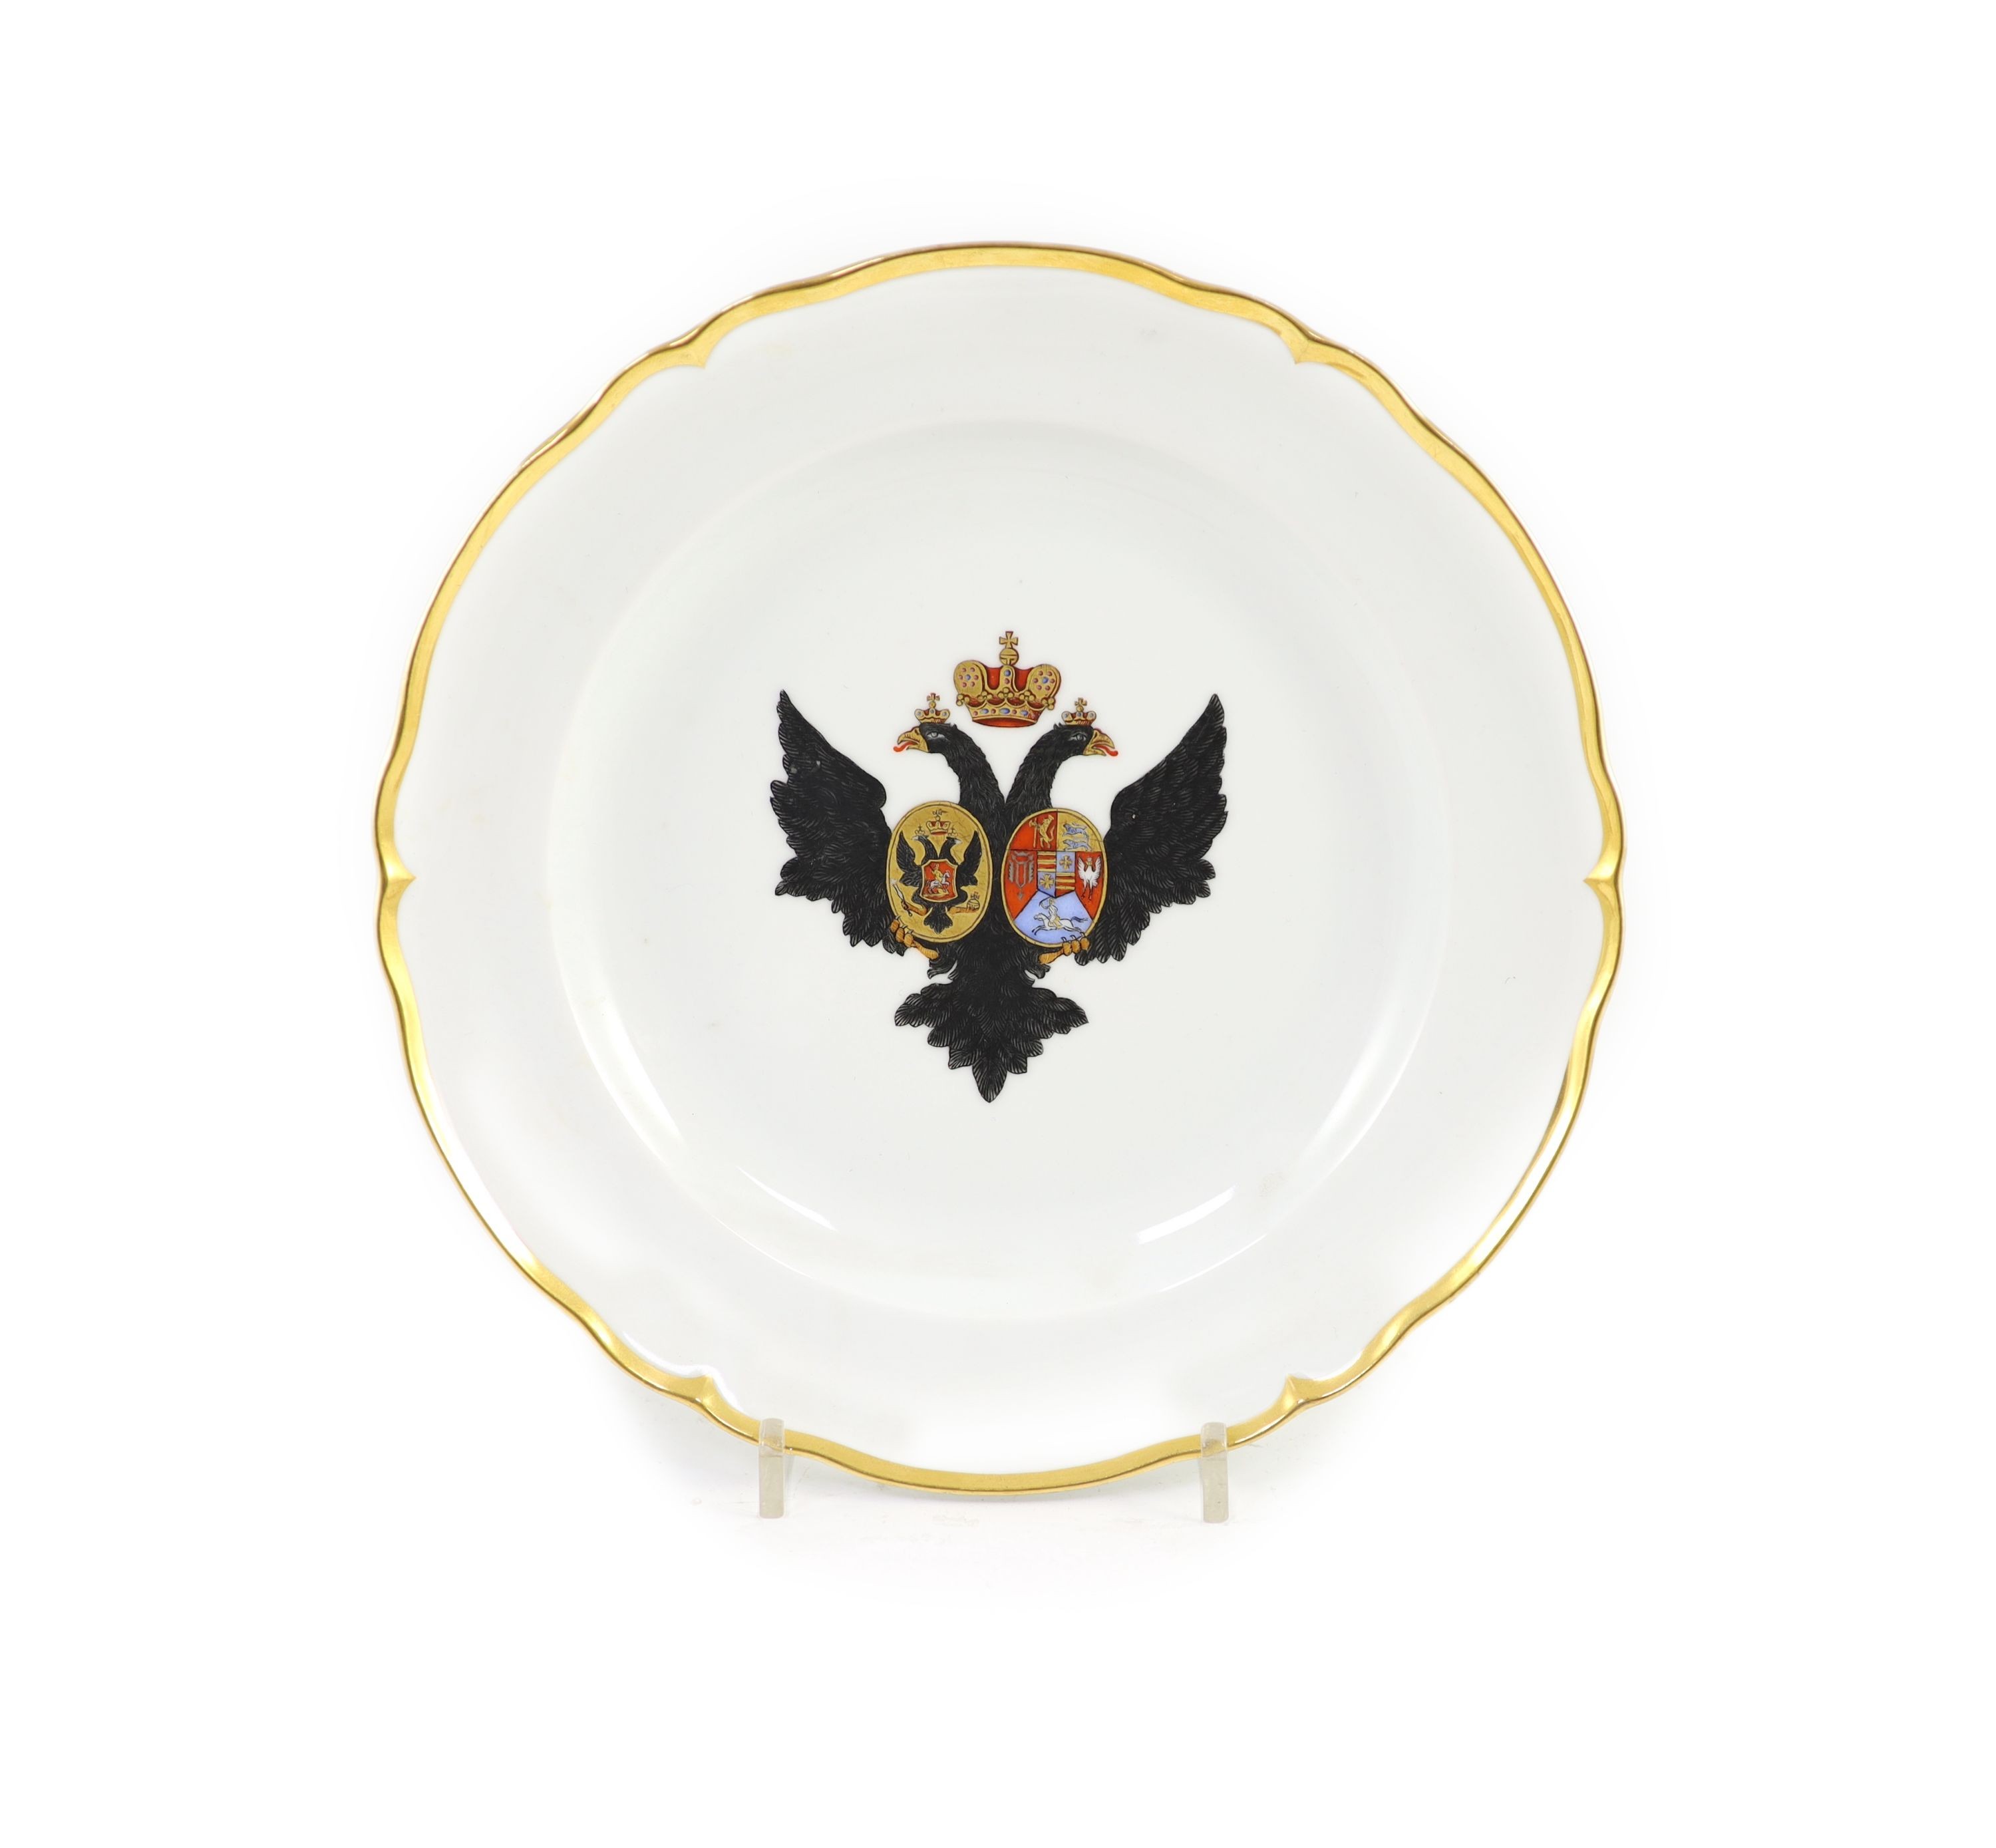 A Russian porcelain armorial plate, Imperial Porcelain Factory, St. Petersburg, Period of Alexander II, (ruled 1856-81), 24.8 cm diameter                                                                                   